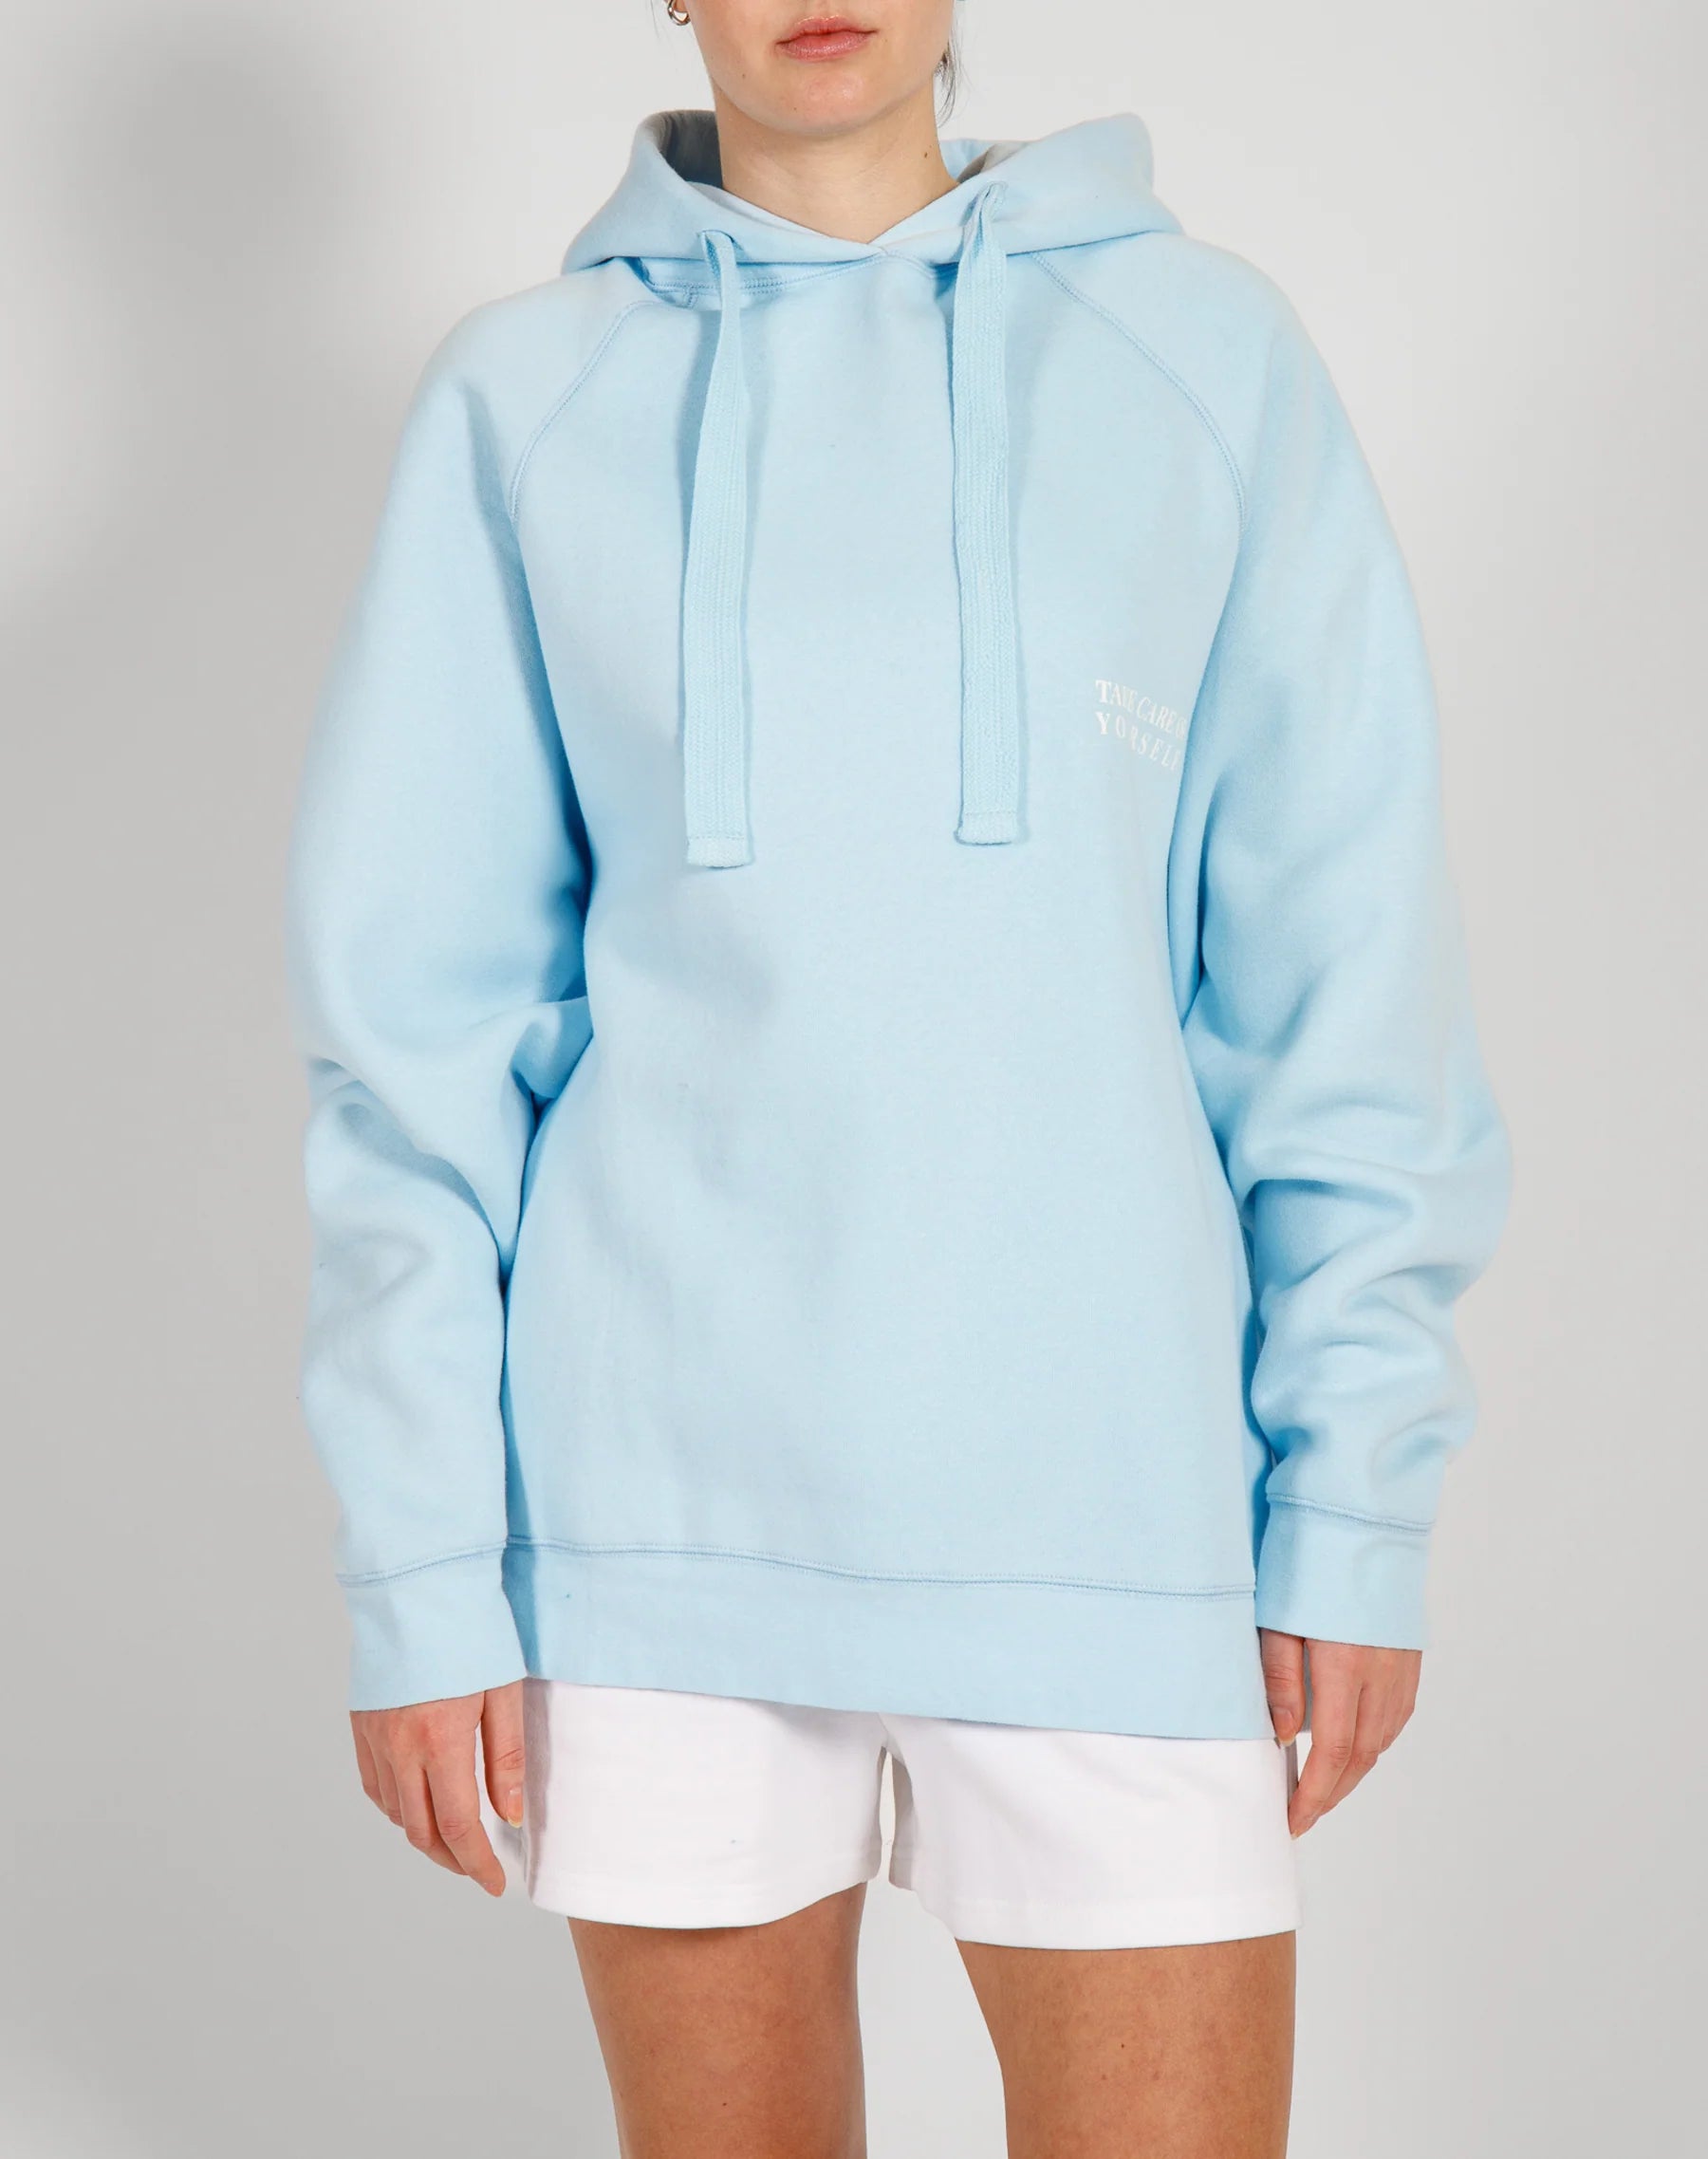 The "TAKE CARE" Not Your Boyfriend's Hoodie | Baby Blue - BTL